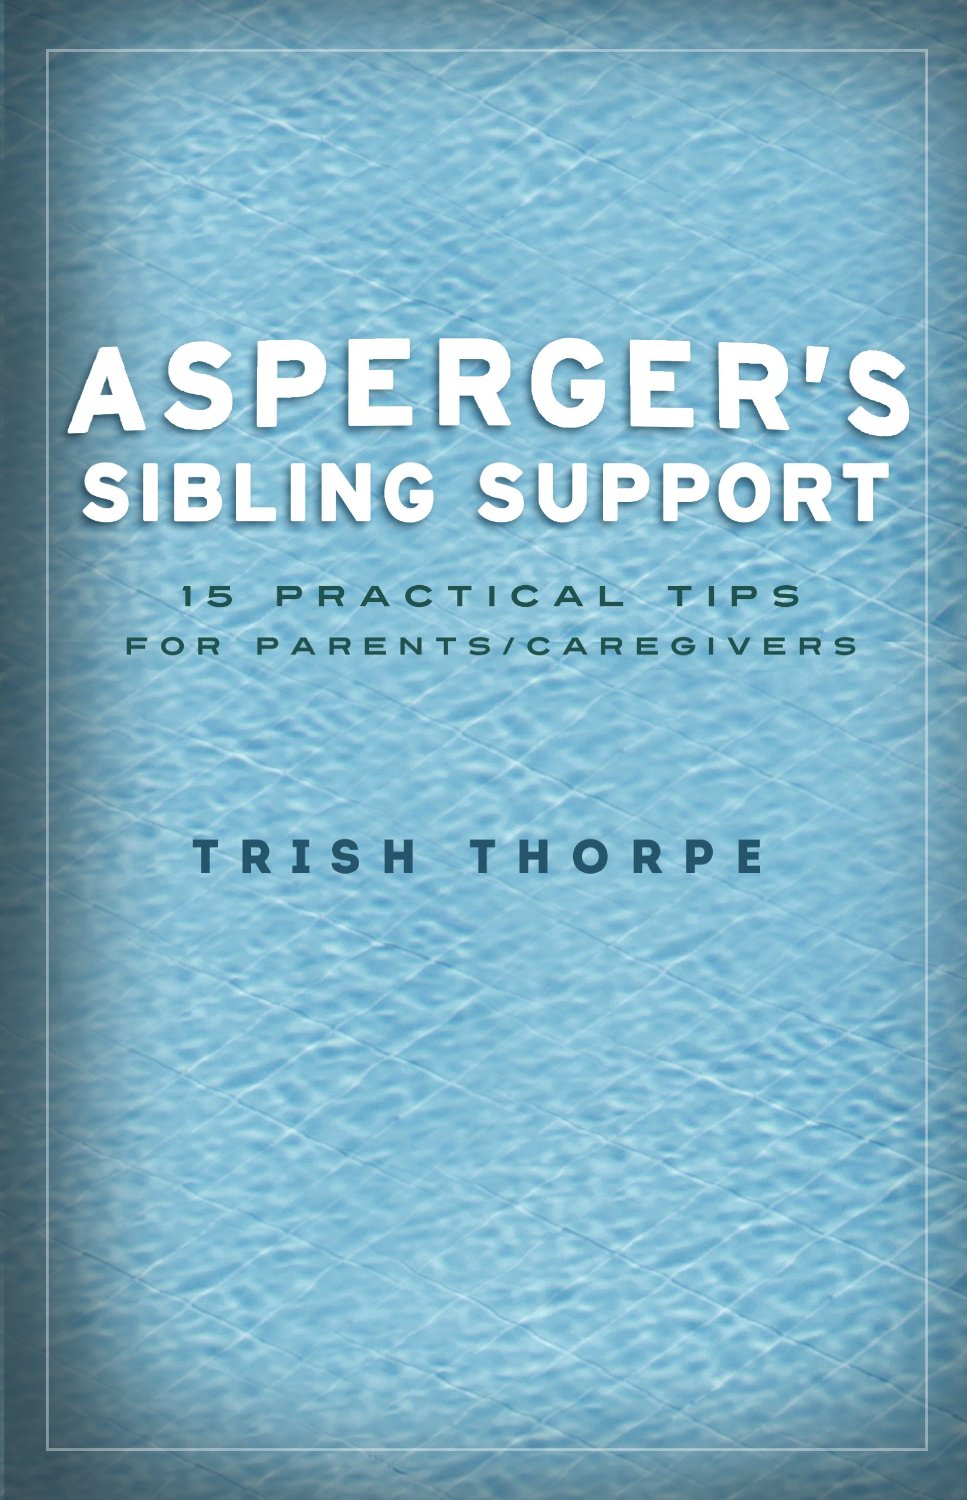 Asperger’s Sibling Support: 15 Practical Tips for Parents/Caregivers by Trish Thorpe